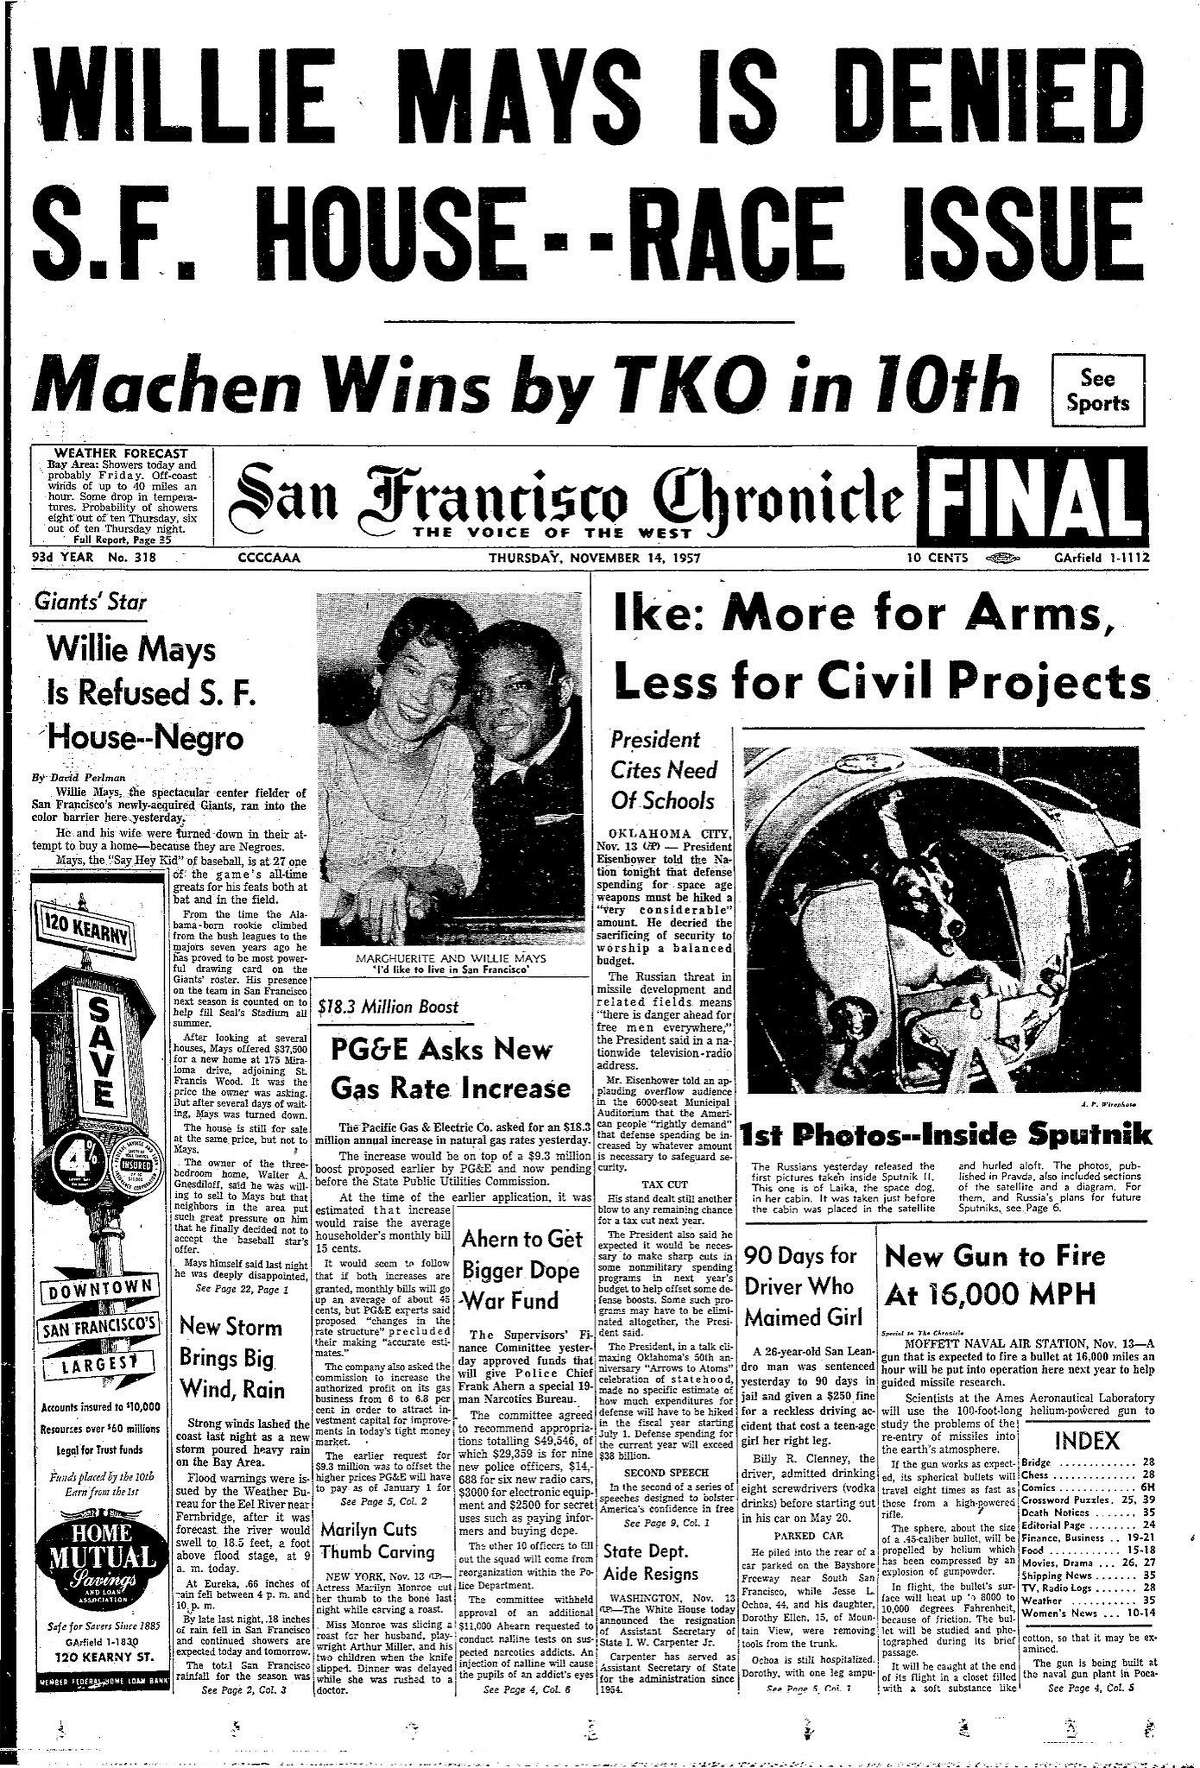 Historic Chronicle Front Page November 14, 1957 Willie Mays is denied his plan to buy a house in San Francisco, because of his race Chron365, Chroncover